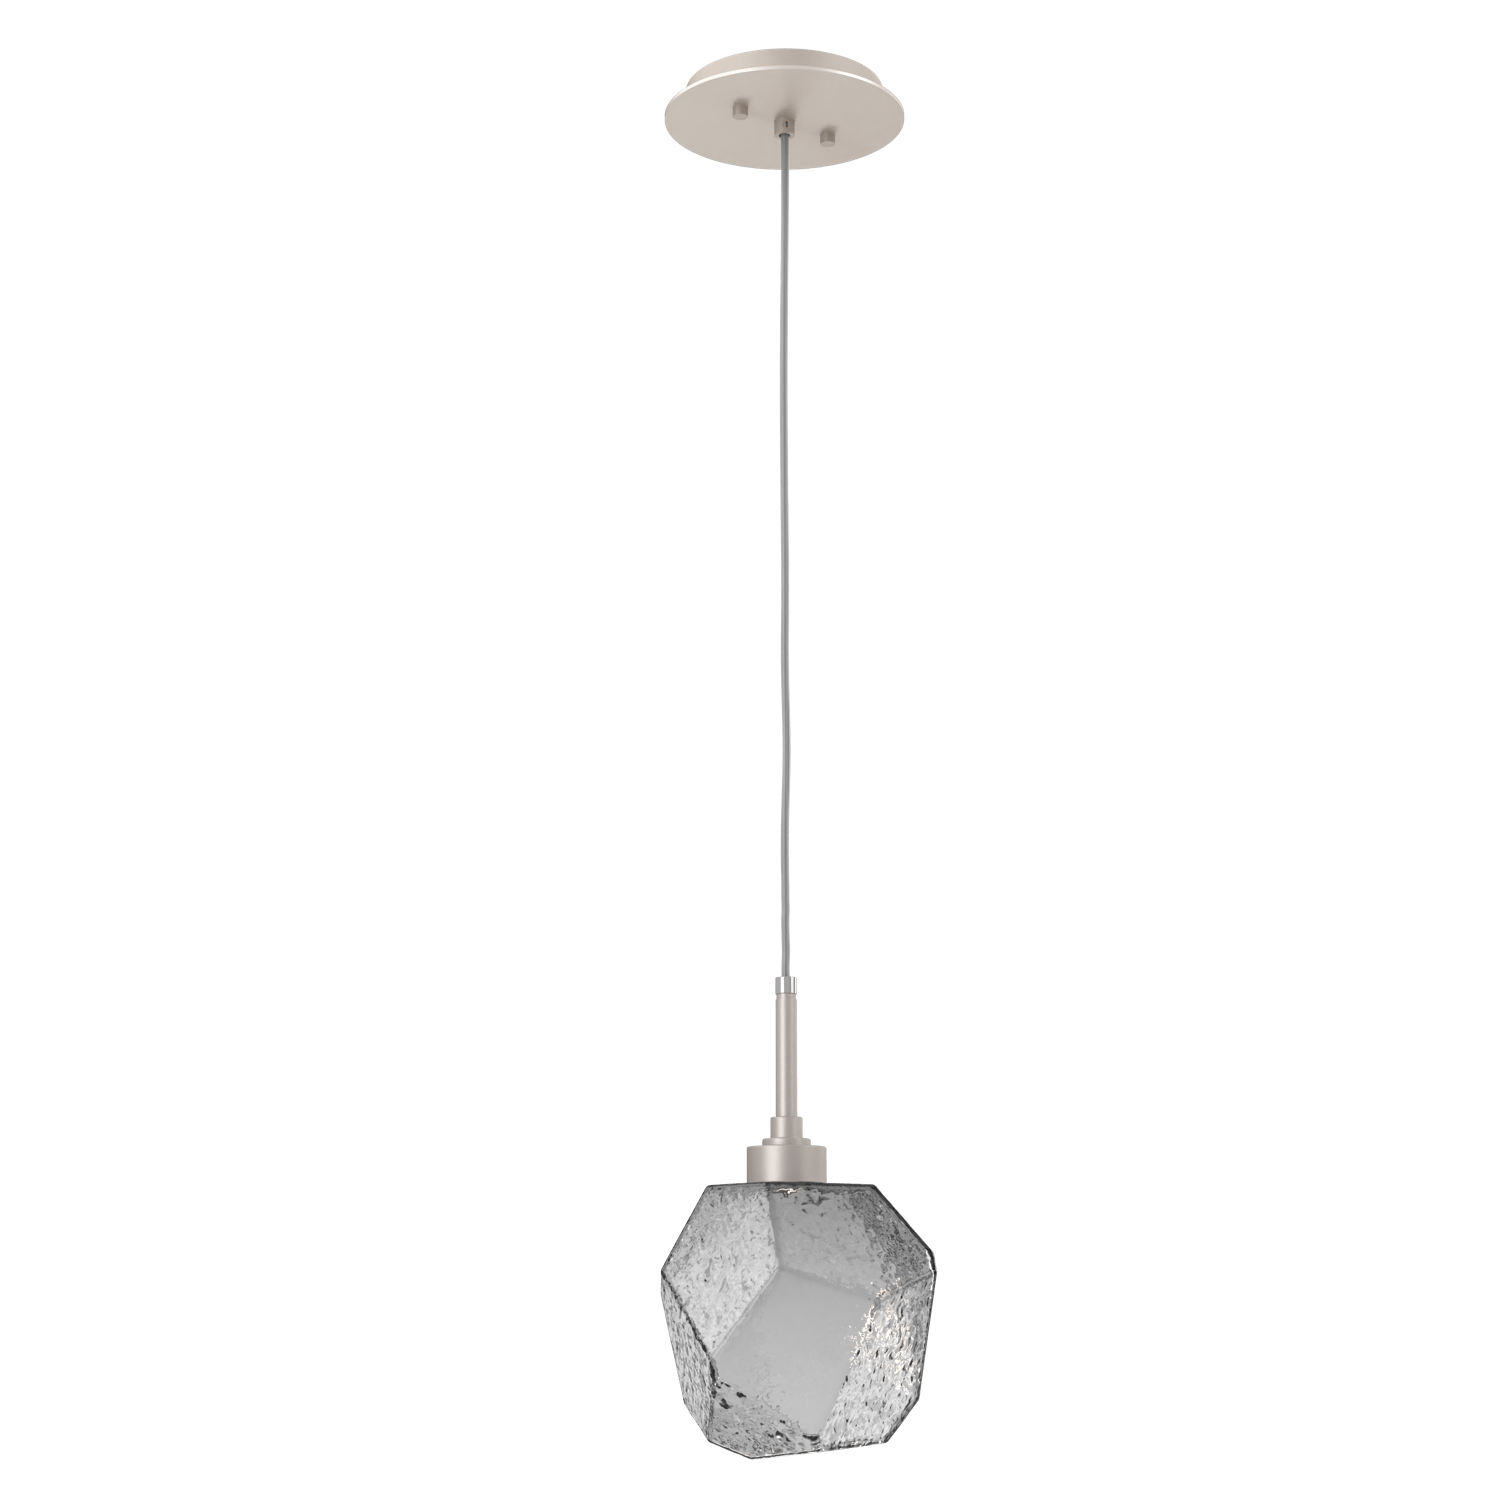 LAB0039-01-BS-S-Hammerton-Studio-Gem-pendant-light-with-metallic-beige-silver-finish-and-smoke-blown-glass-shades-and-LED-lamping